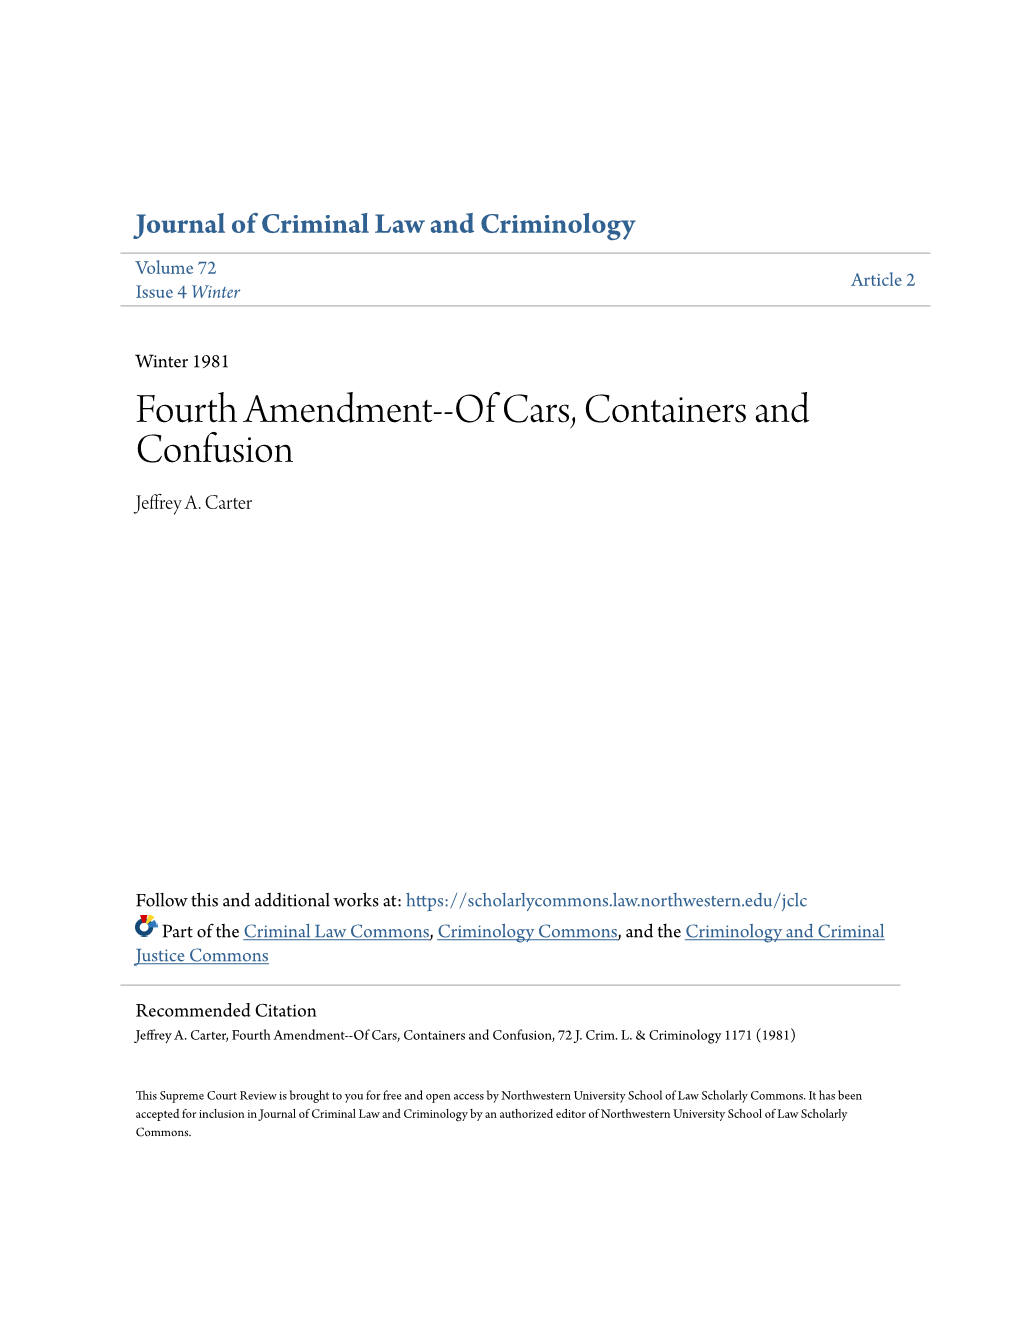 Fourth Amendment--Of Cars, Containers and Confusion Jeffrey A